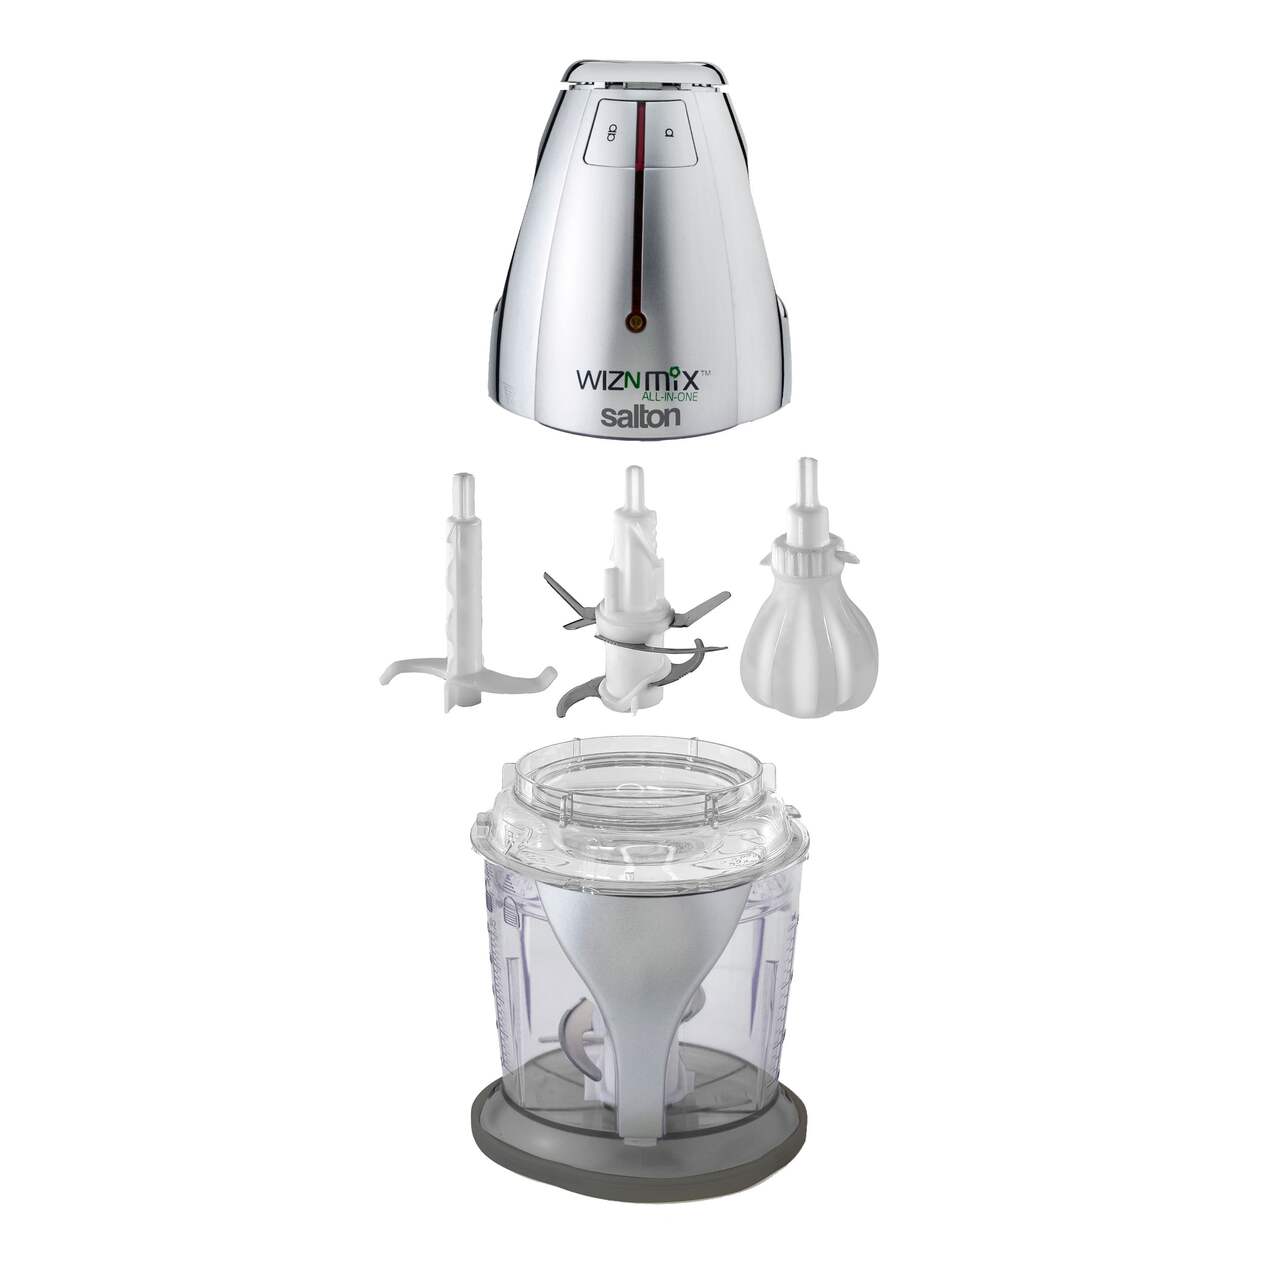 https://media-www.canadiantire.ca/product/living/kitchen/kitchen-appliances/0439025/salton-wiznmix-all-in-one-food-processor-8039fde7-41d0-44ef-a62e-9c1ac1050749-jpgrendition.jpg?imdensity=1&imwidth=1244&impolicy=mZoom